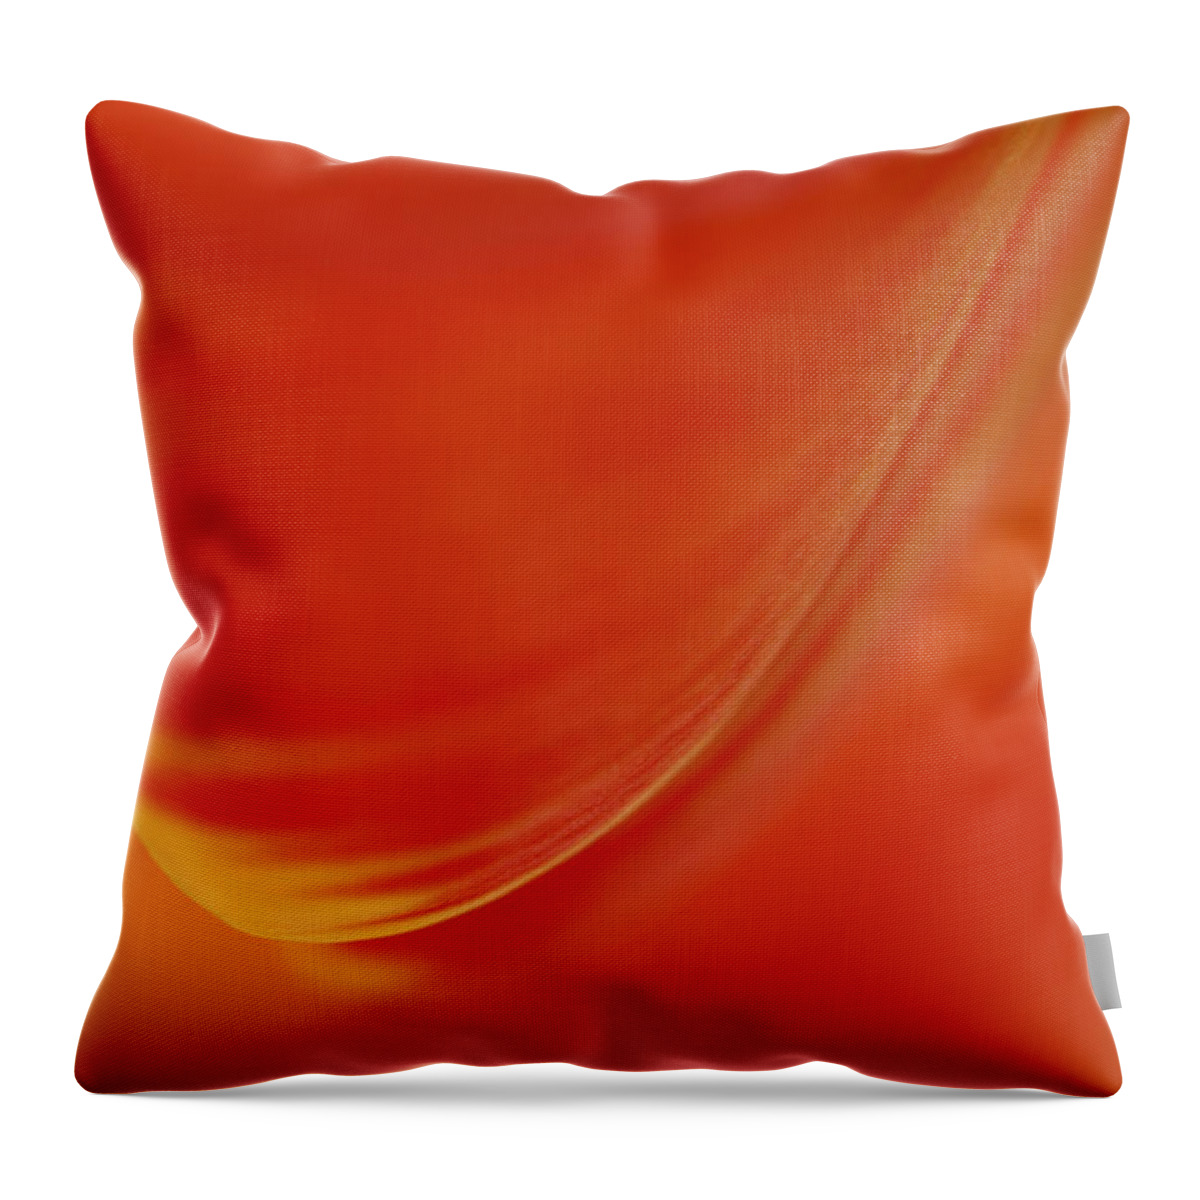 Abstract Throw Pillow featuring the photograph Flower Abstract by Juergen Roth